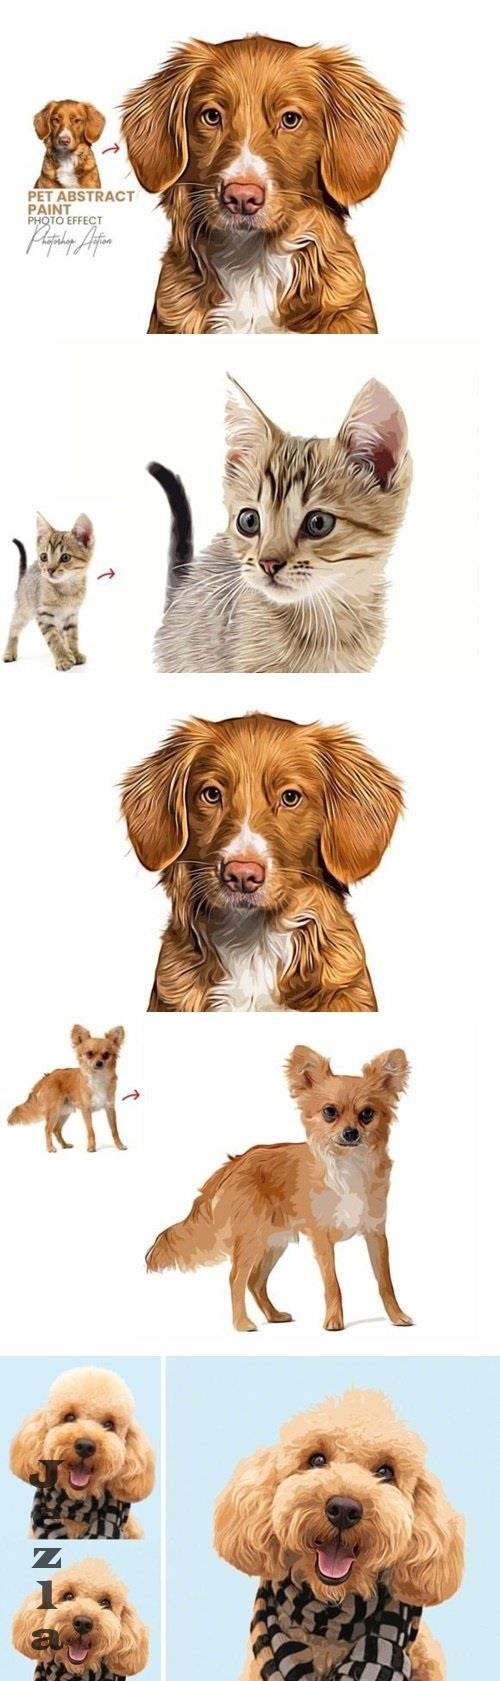 Pet Abstract Paint Photoshop Action - 92045723